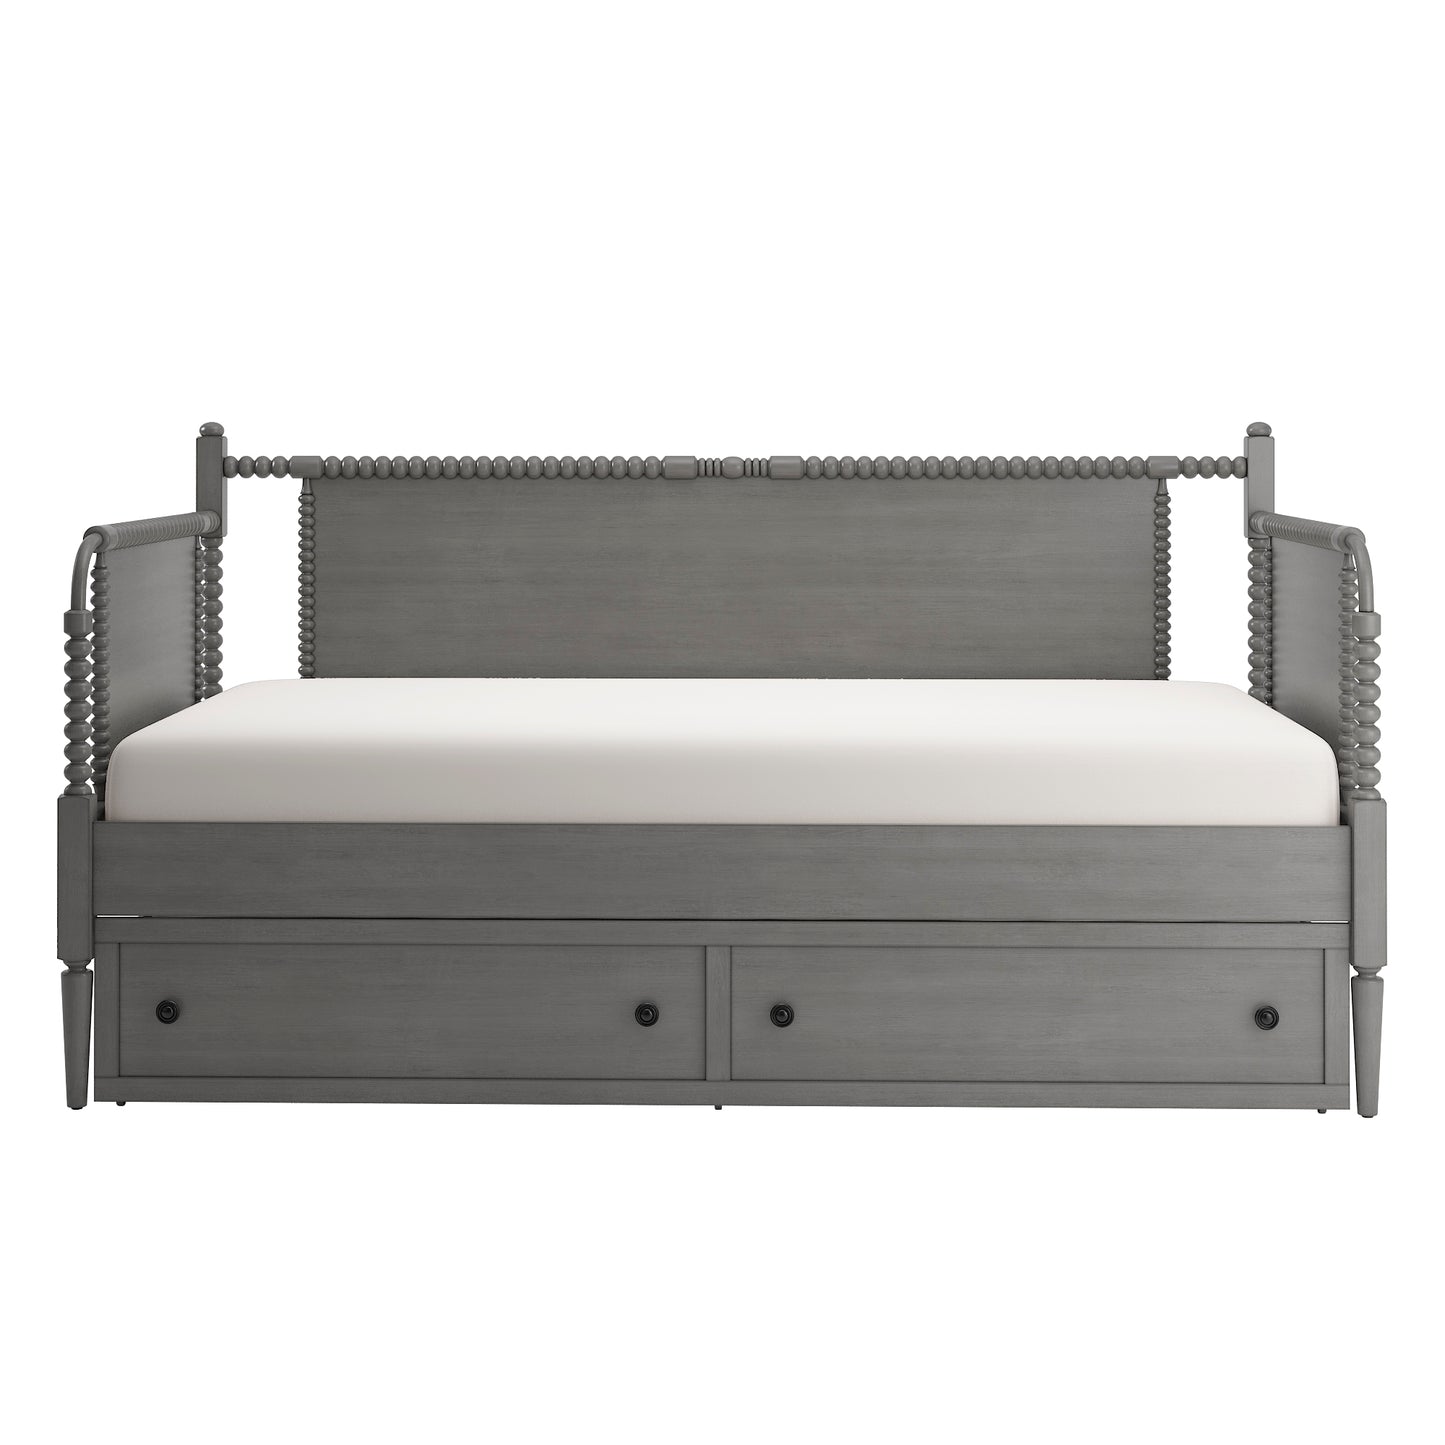 Traditional Beaded Wood Daybed - Antique Grey, With Trundle